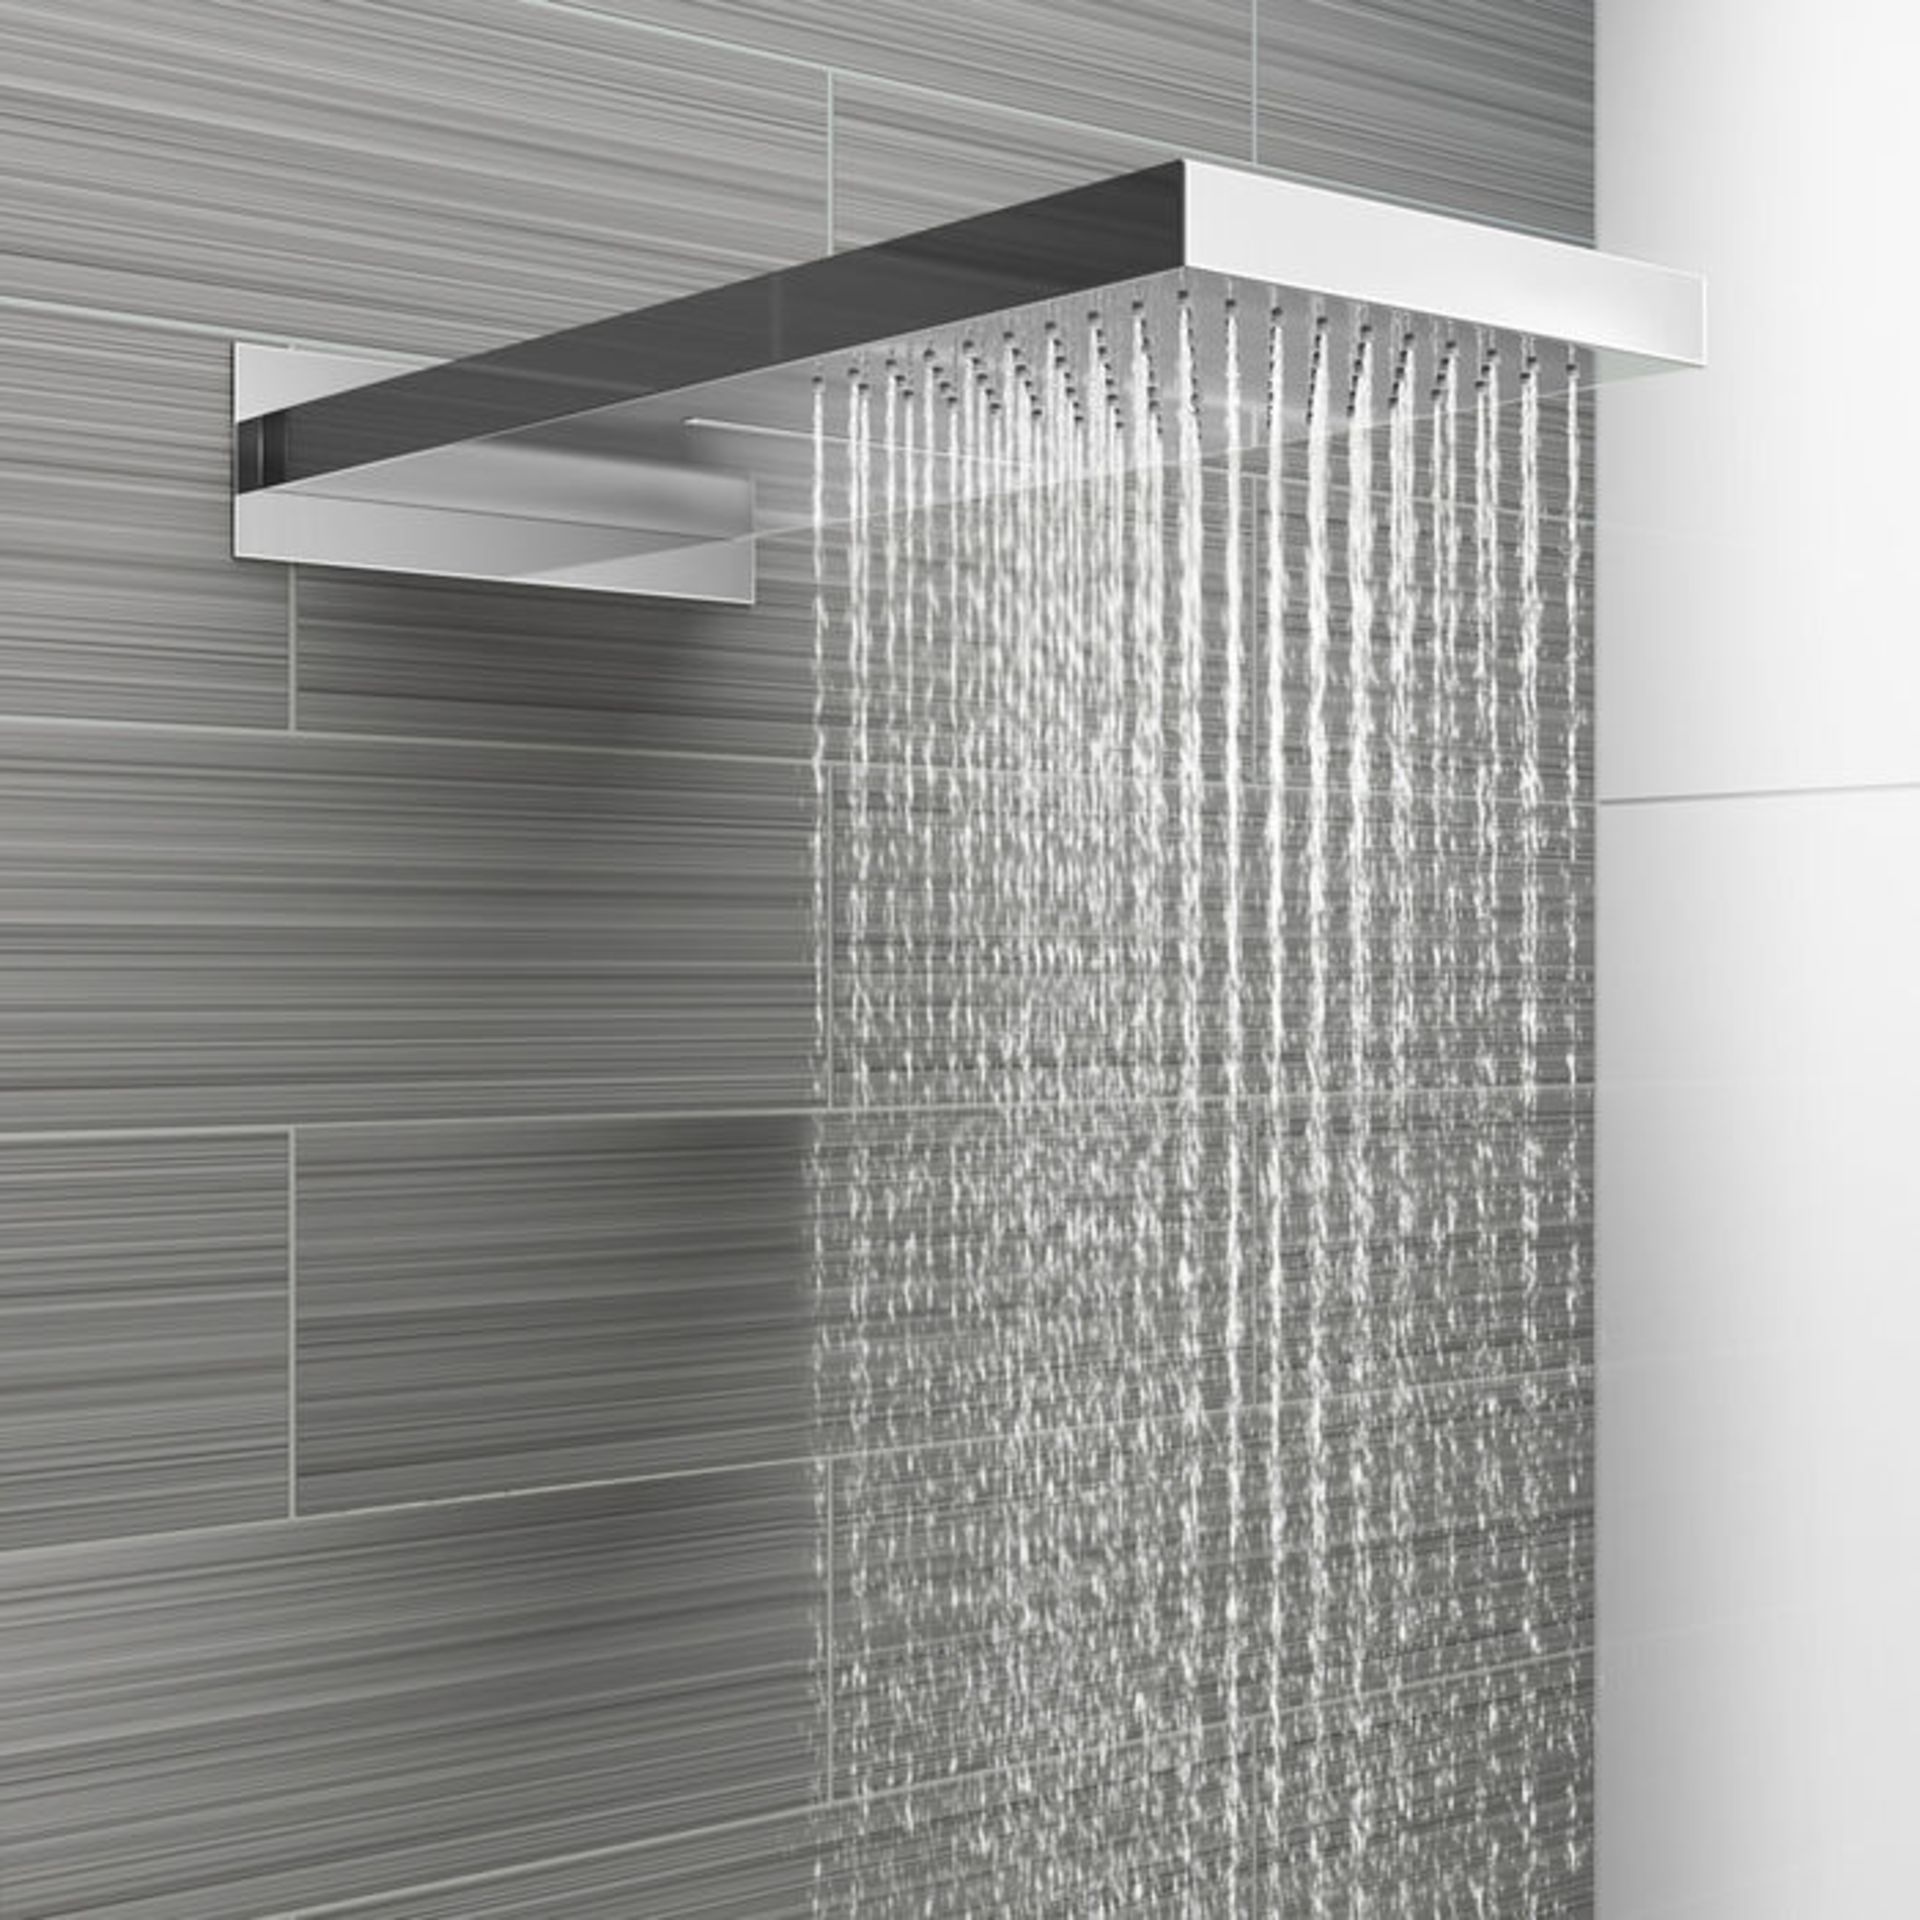 (CT7) 230x500mm Stainless Steel Waterfall Shower Head. RRP £374.98. Dual function waterfall and - Image 7 of 12